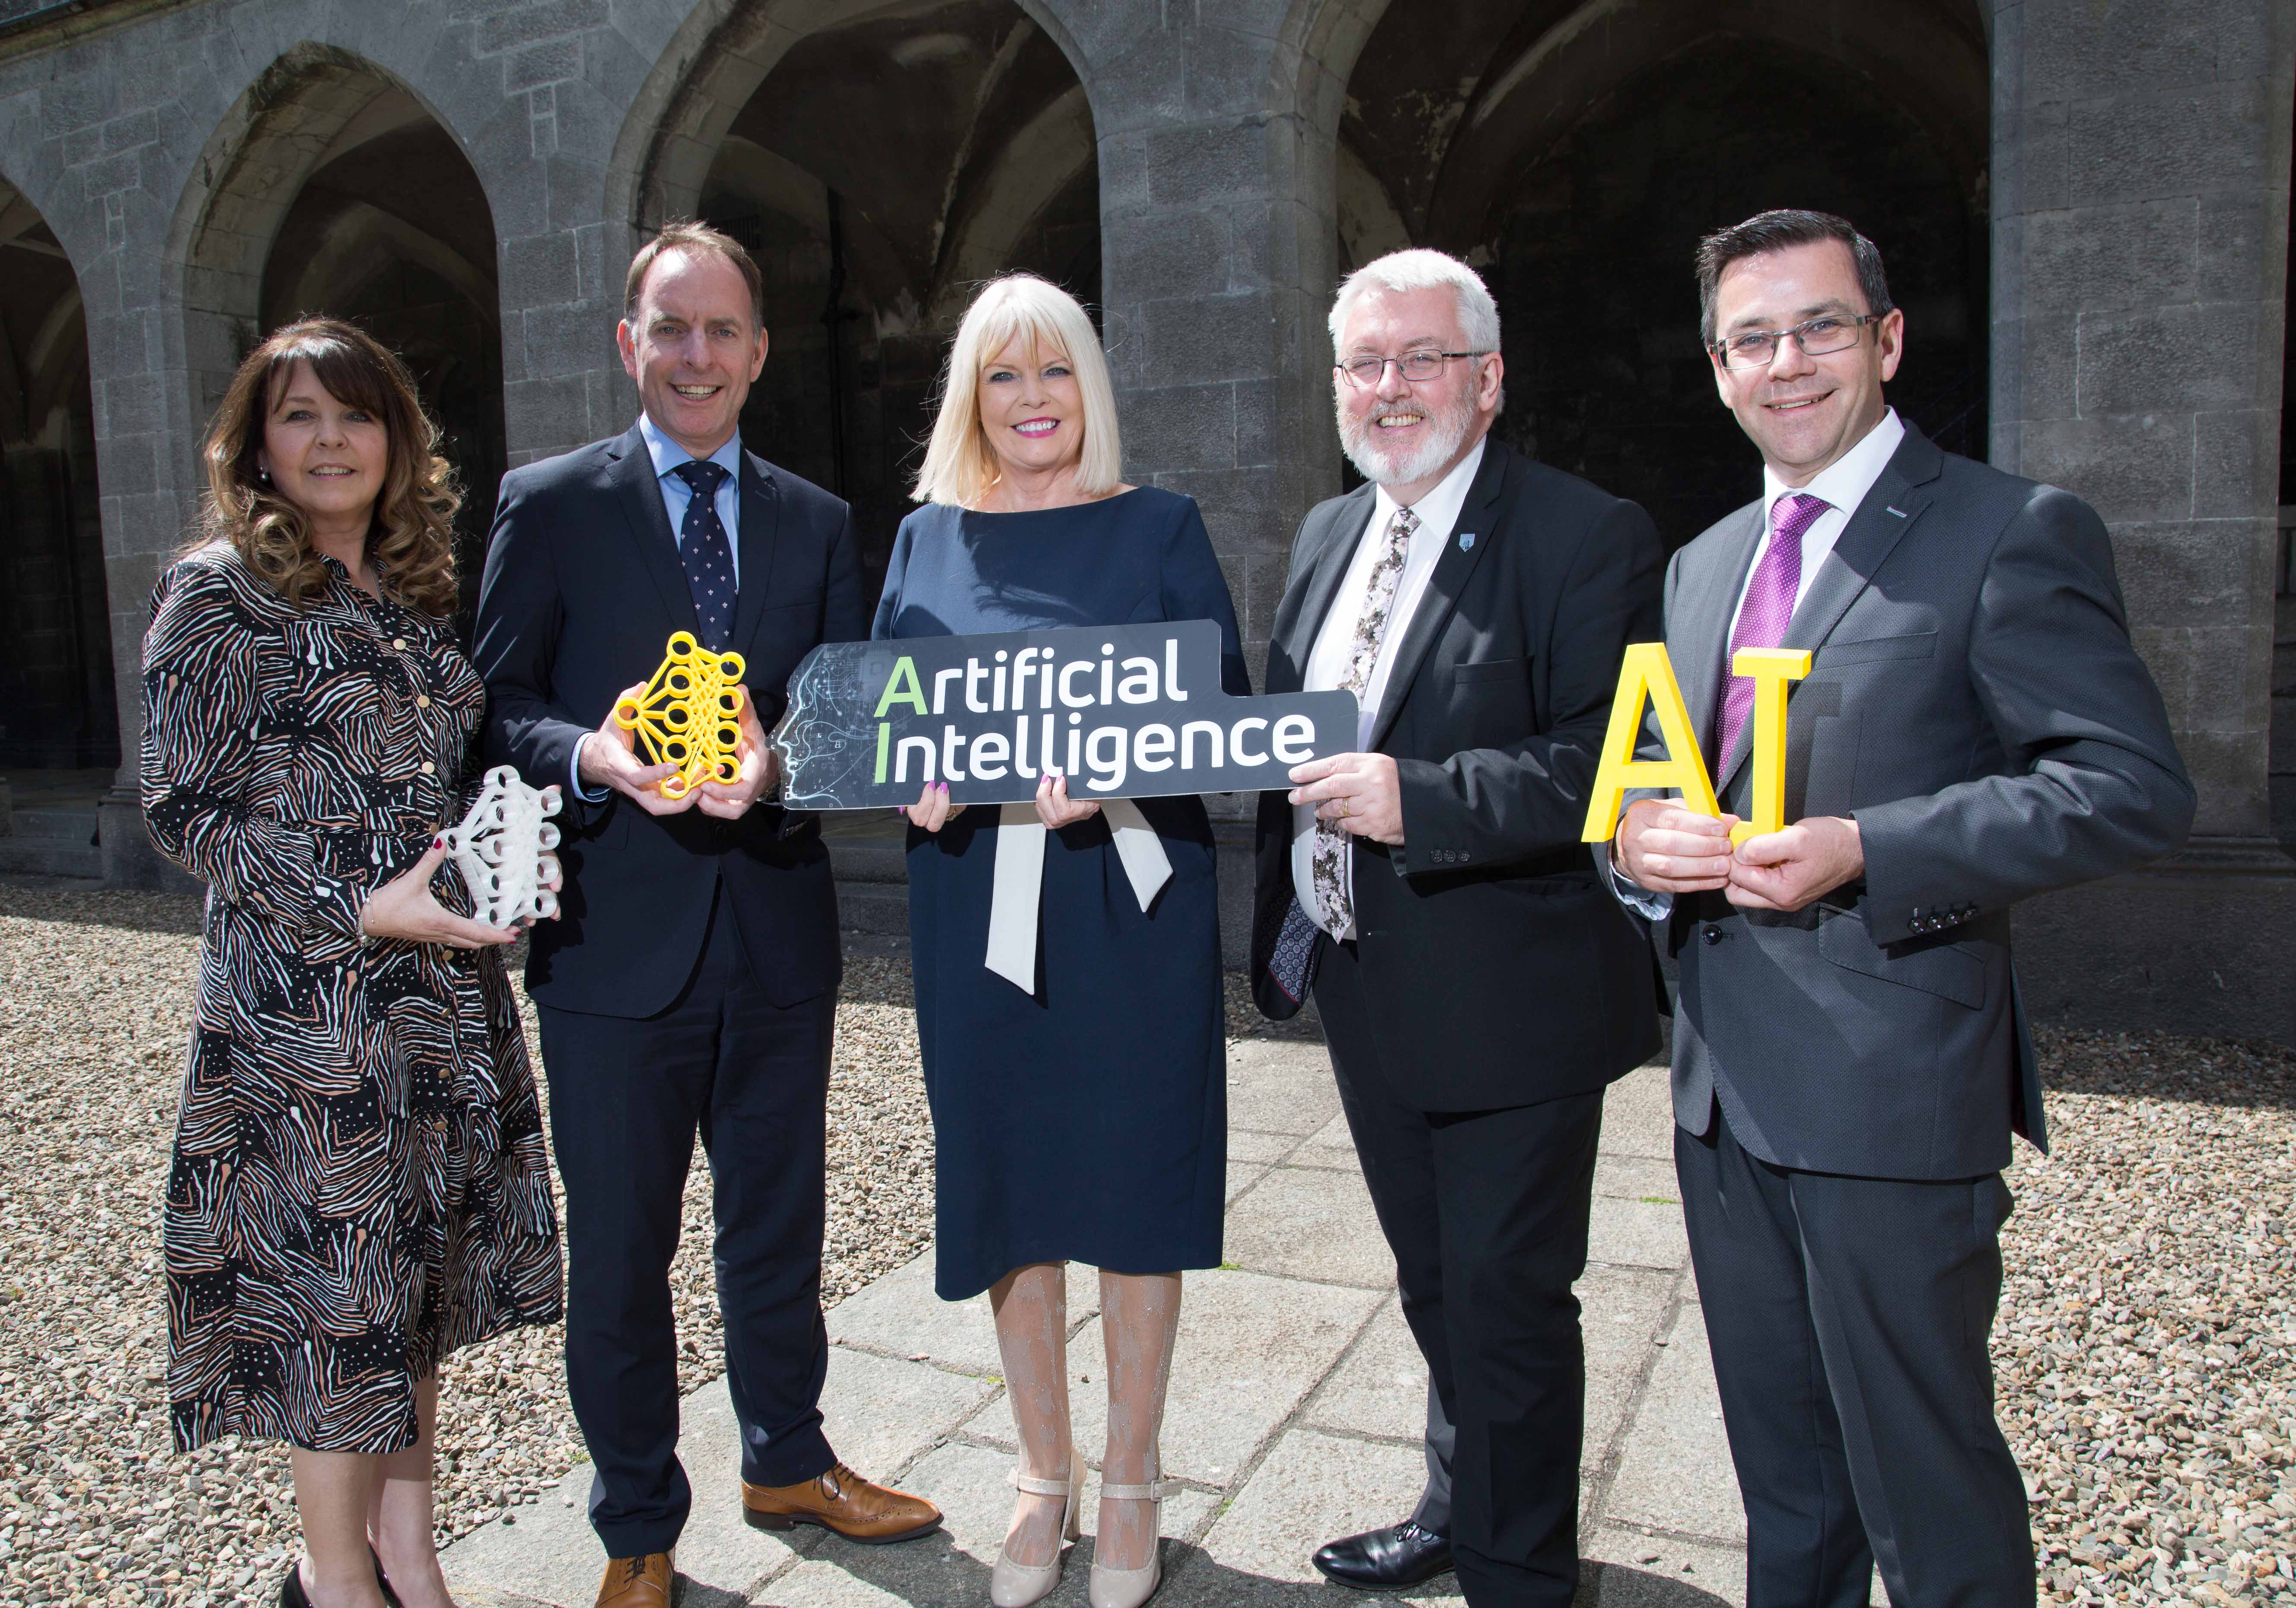 NUI Galway launches two new postgraduate programmes in Artificial Intelligence